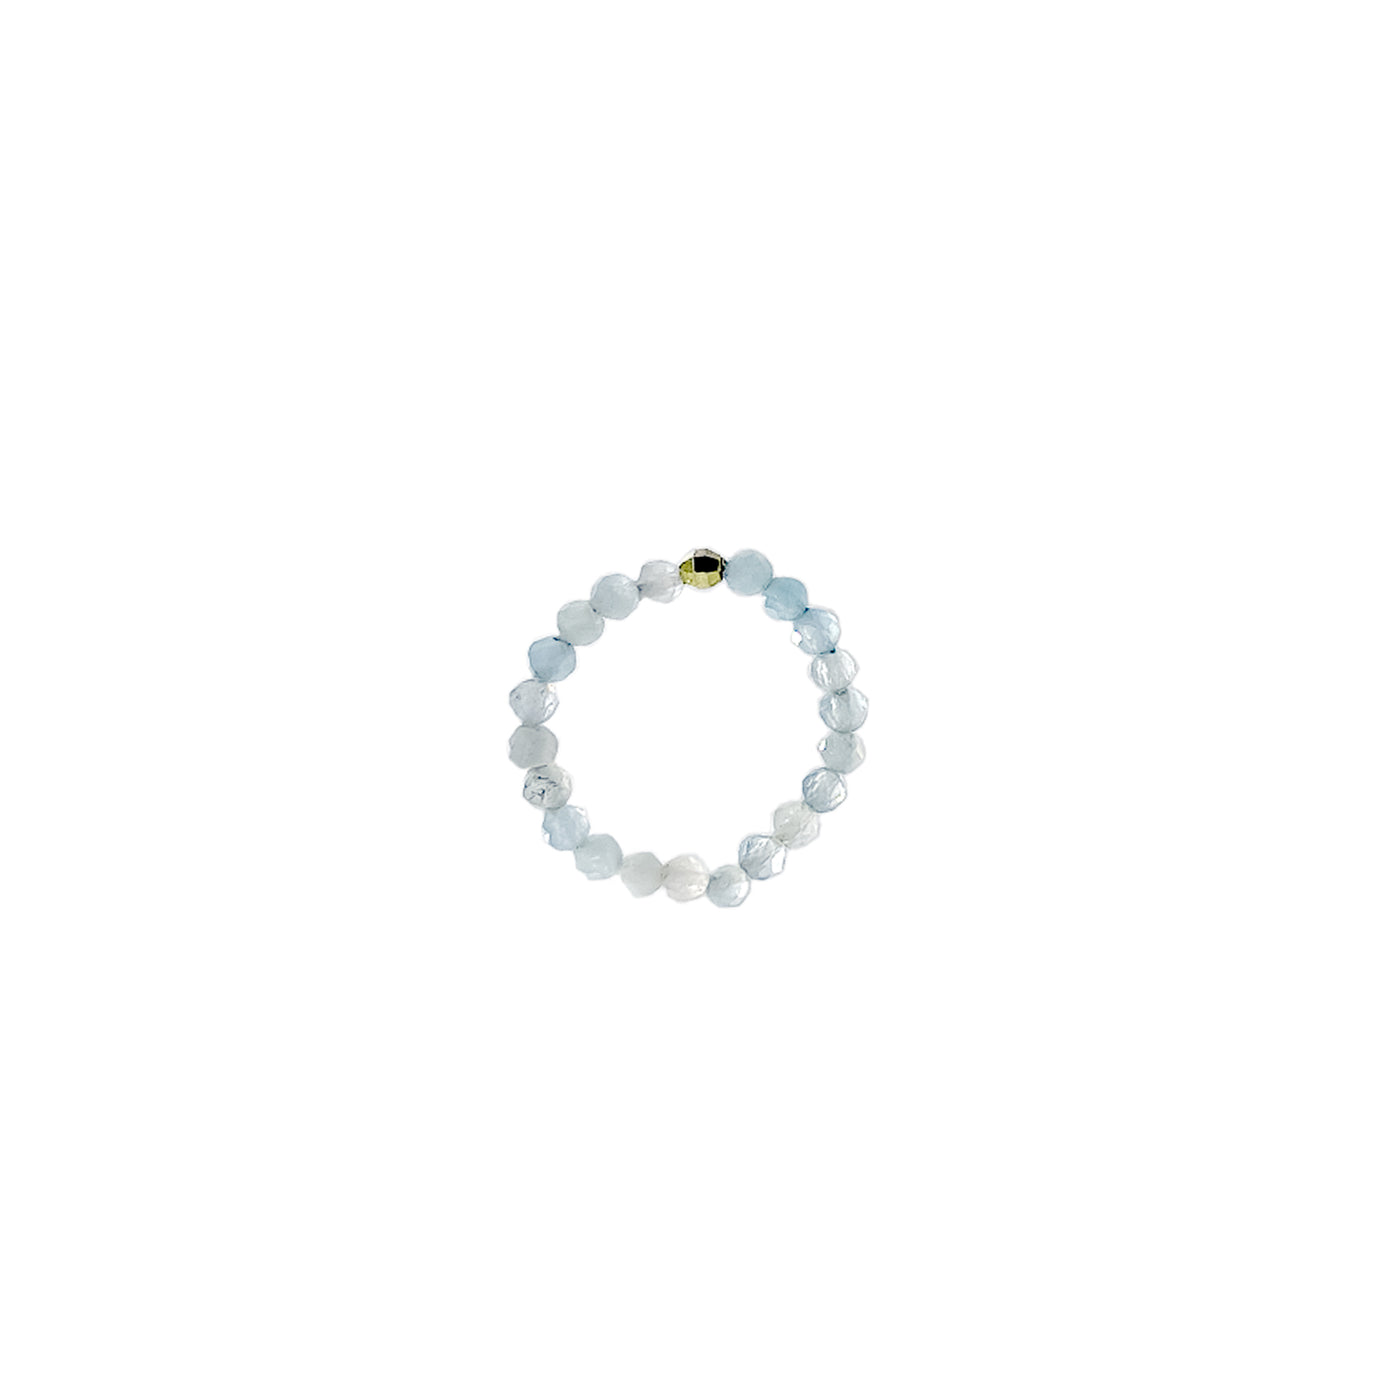 MARCH Birthstone: Aquamarine Women's Delicate Faceted Stretch Ring